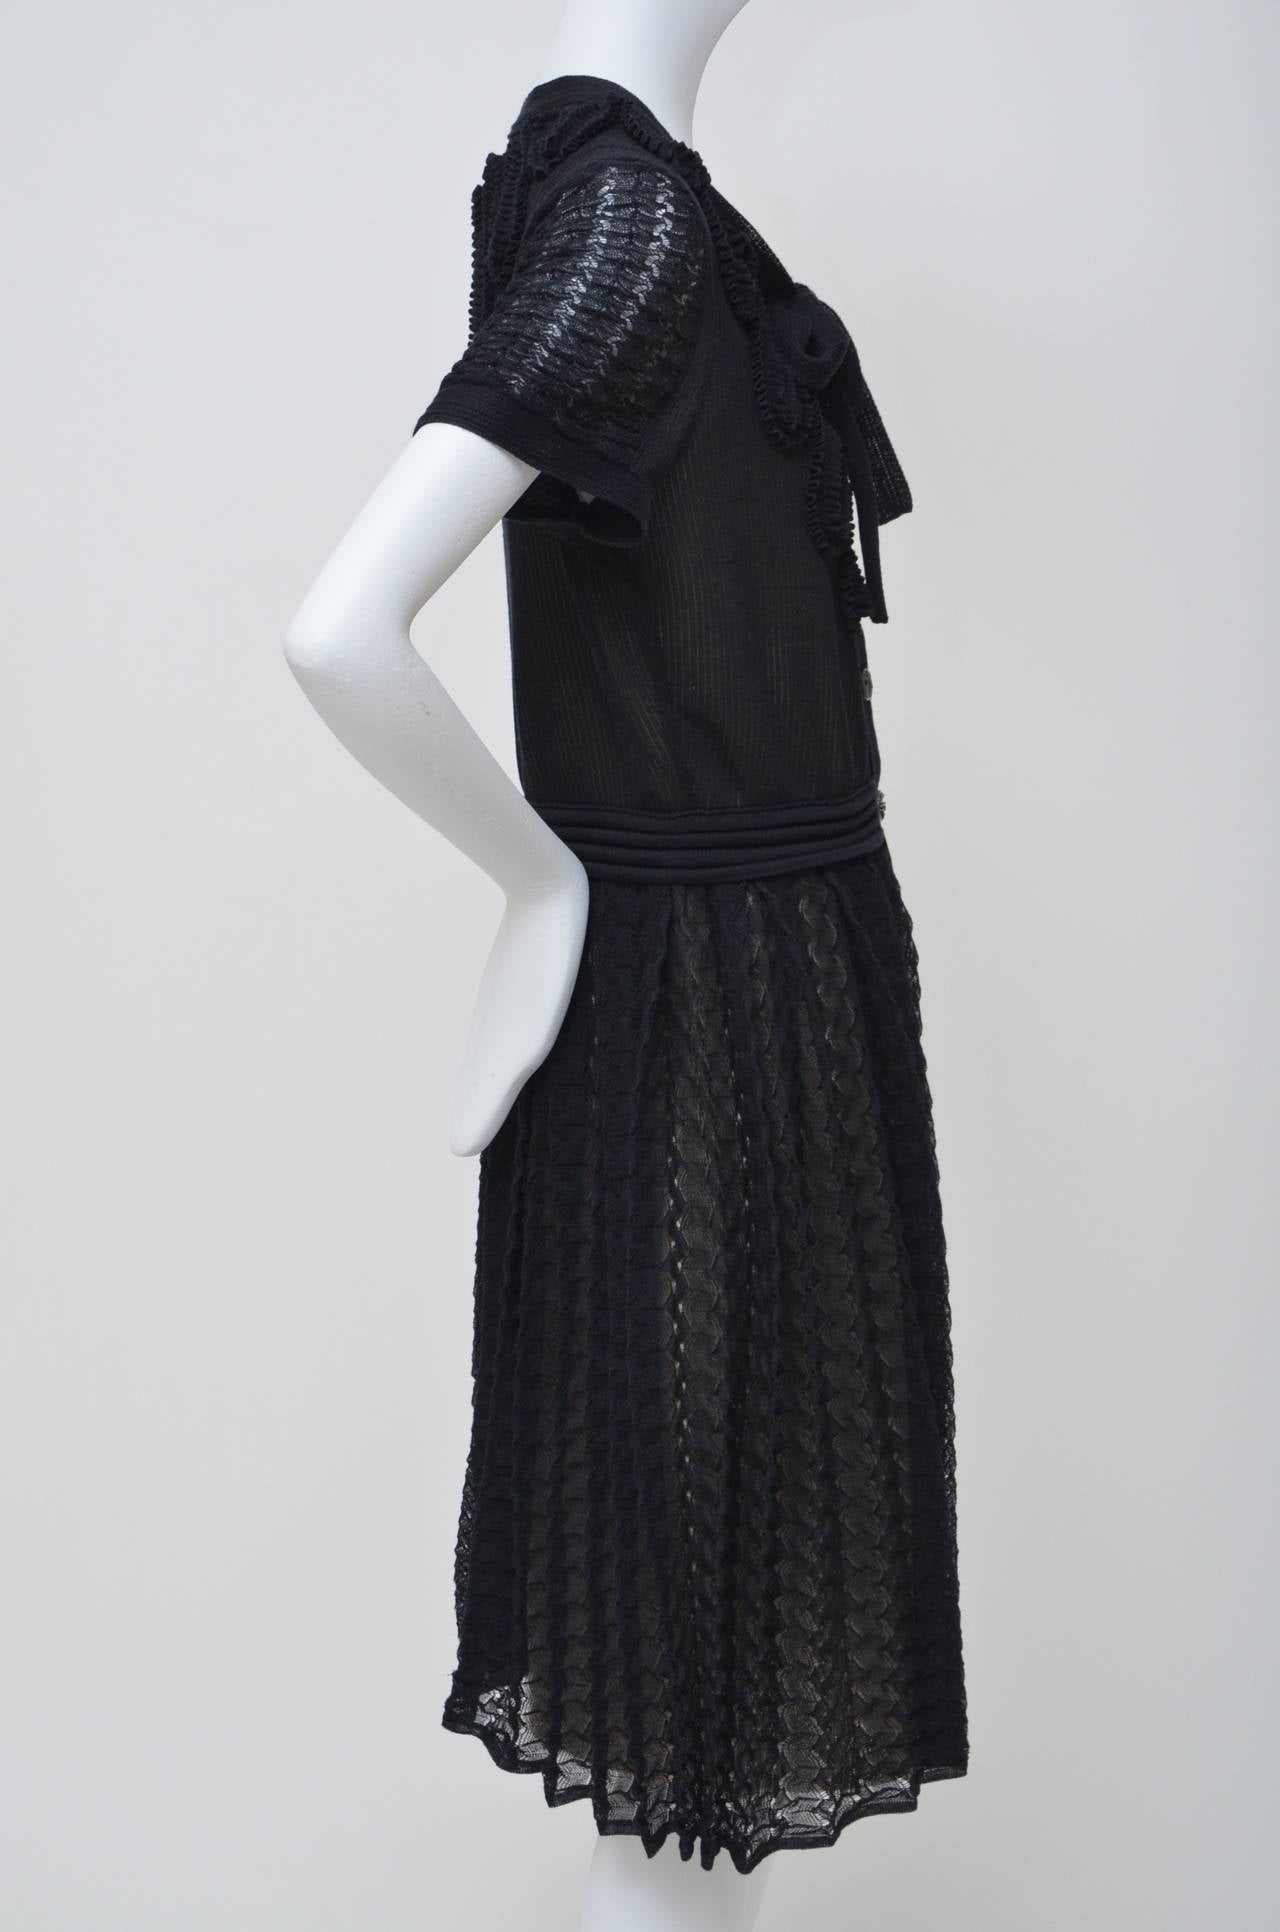 Black Chanel Lace Knit Puff Sleeve Jeweled Buttons Ready to Wear Dress, Spring 2010